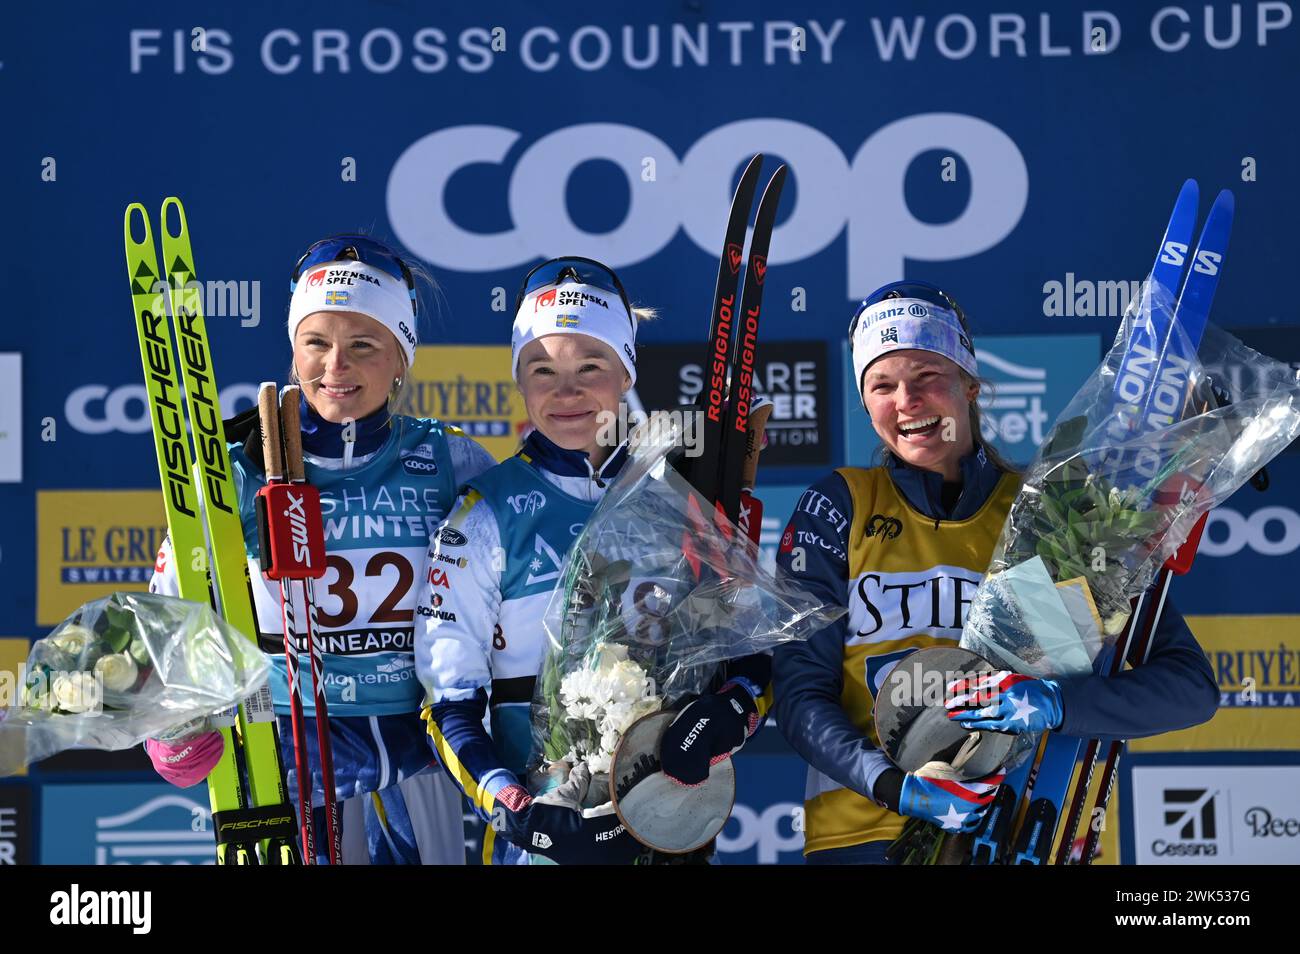 Minneapolis, Minnesota, USA, 18 February, 2024: American Jessie Diggins, right, on the podium after finishing third in the womern's 10-k FIS world cup cross country ski race at Theodore Wirth Regional Park in Minneapolis, Minnesota, USA.  Center, winner Jonna Sundling (SWEDEN); left, second place finisher Frida Karlsson (SWEDEN). Diggins is from Minnesota and the crowd loved her. Credit: John Lazenby/Alamy Live News Stock Photo